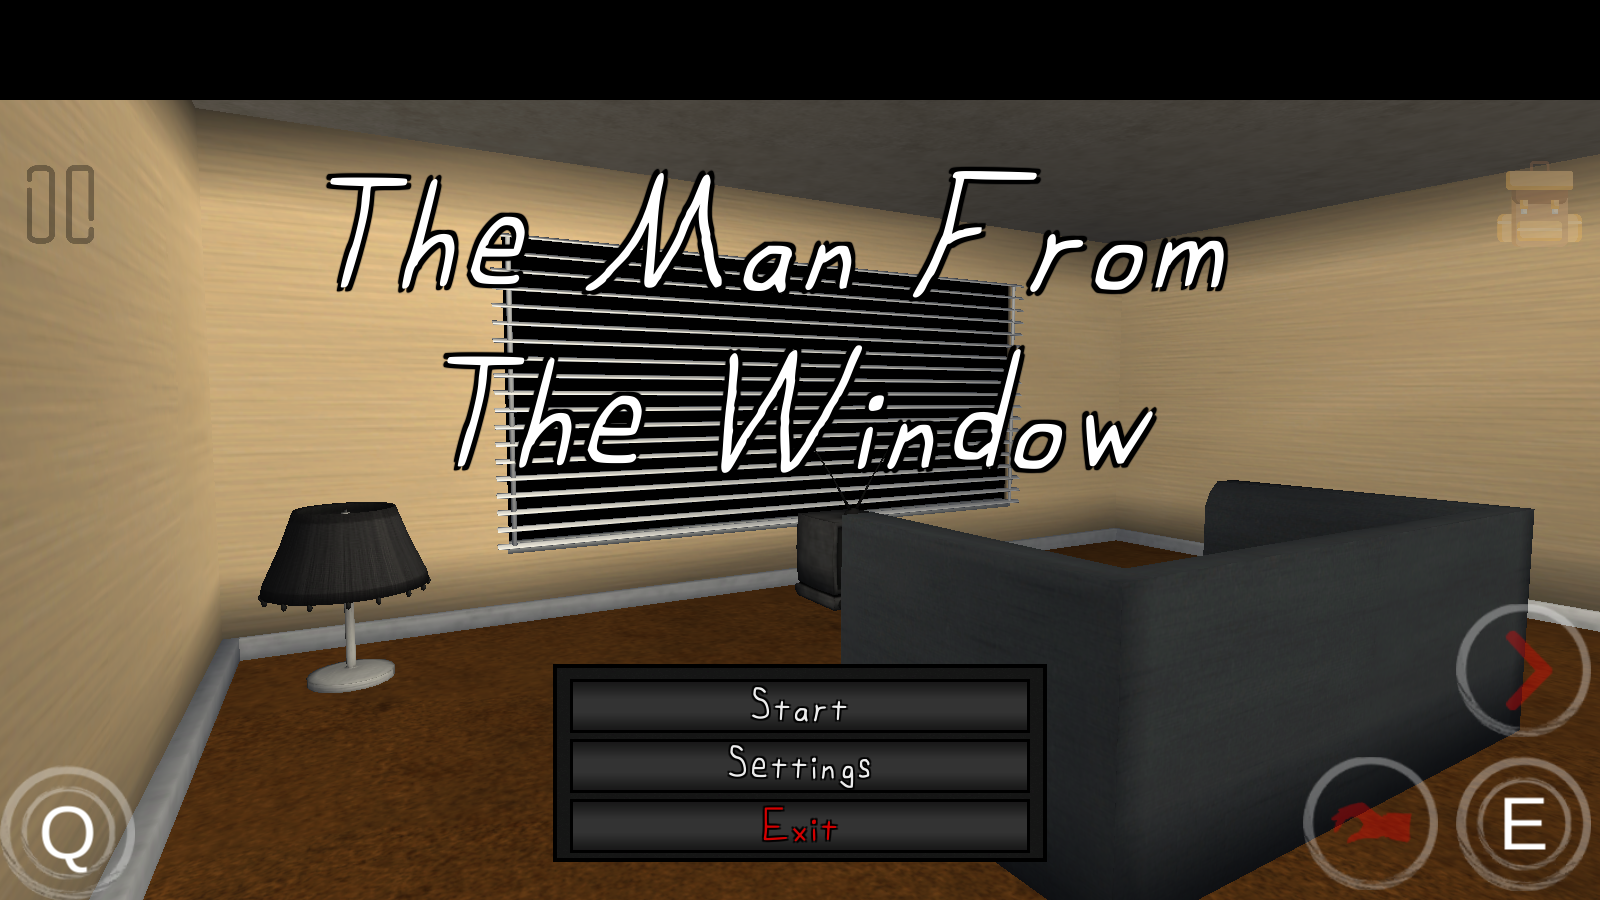 You came into the room man from the window - Roblox